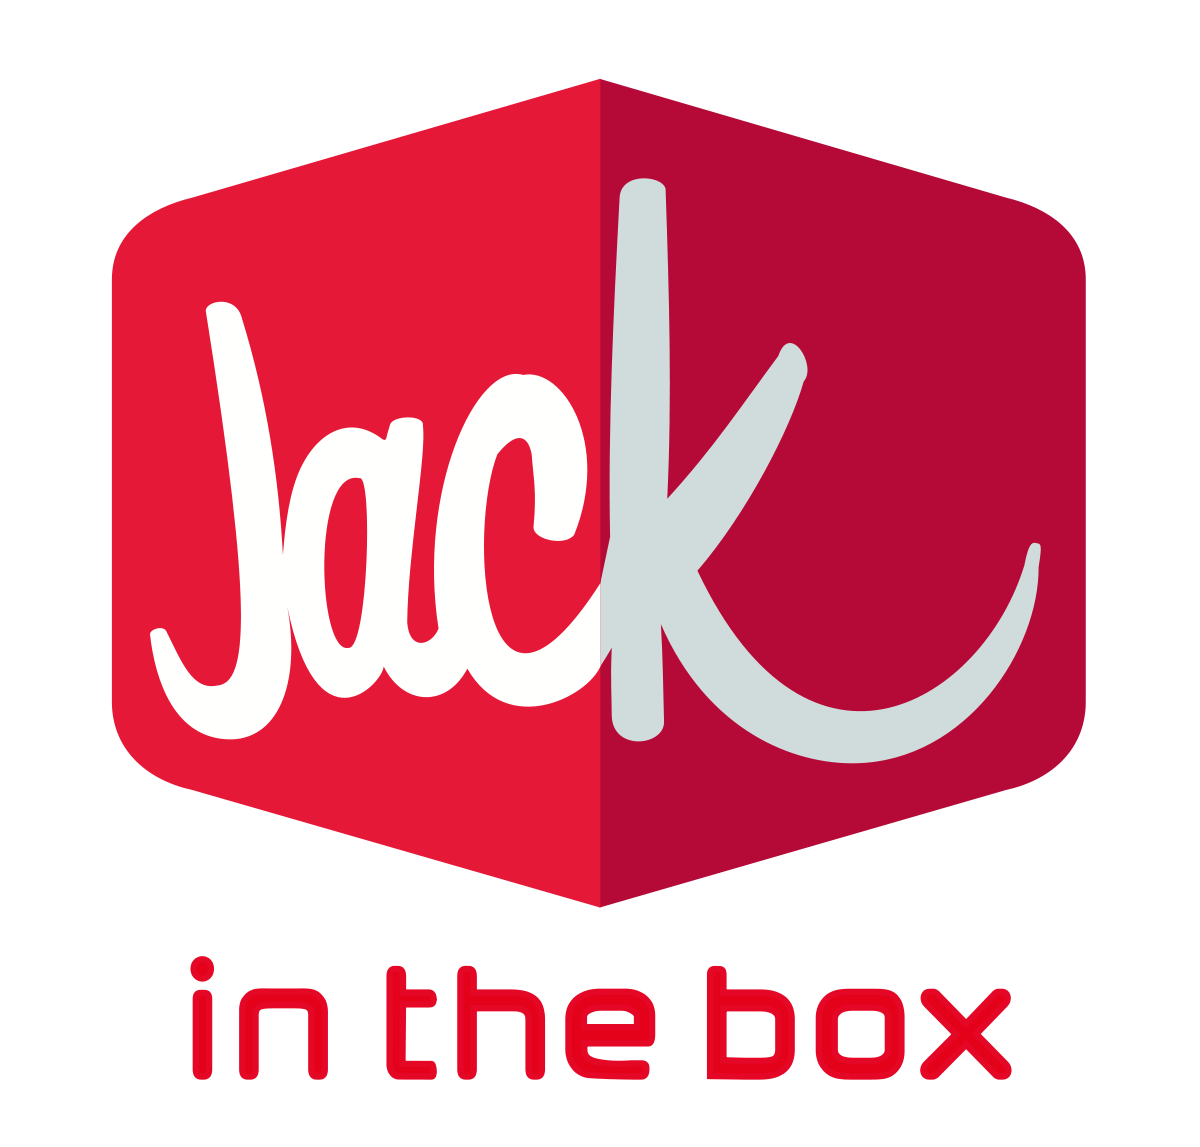 BX Red a Logo - Jack in the Box